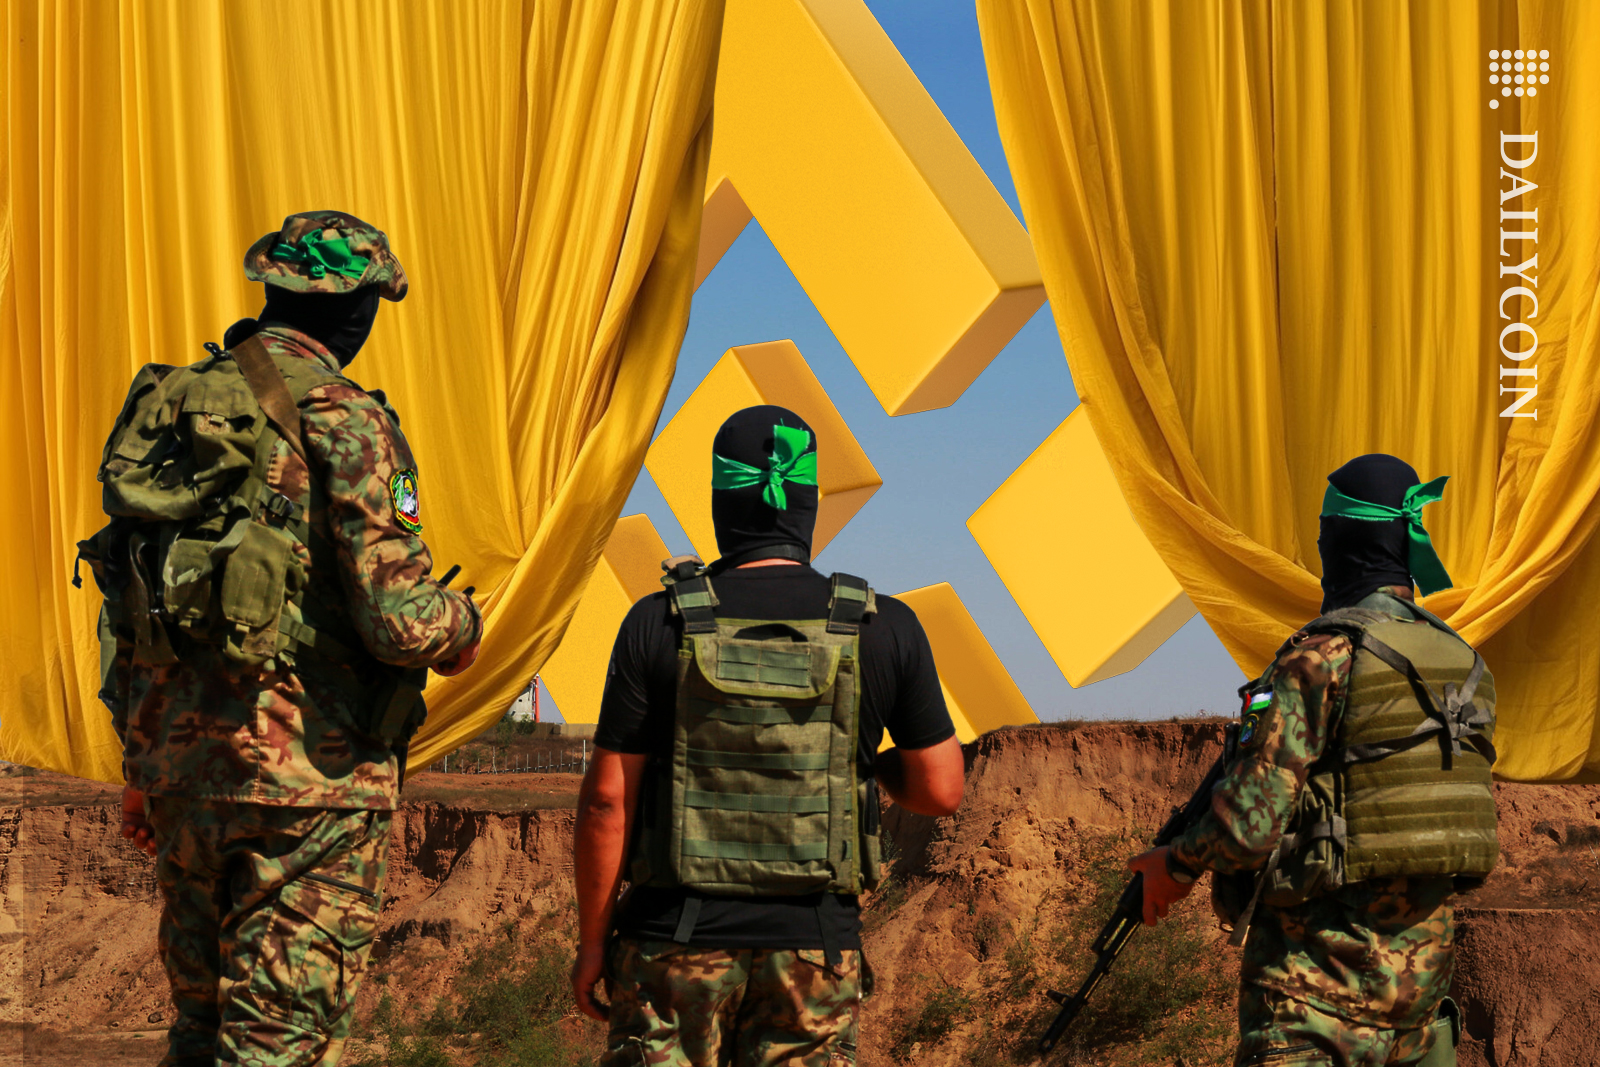 The Binance curtain is closing for the HAMAS group.